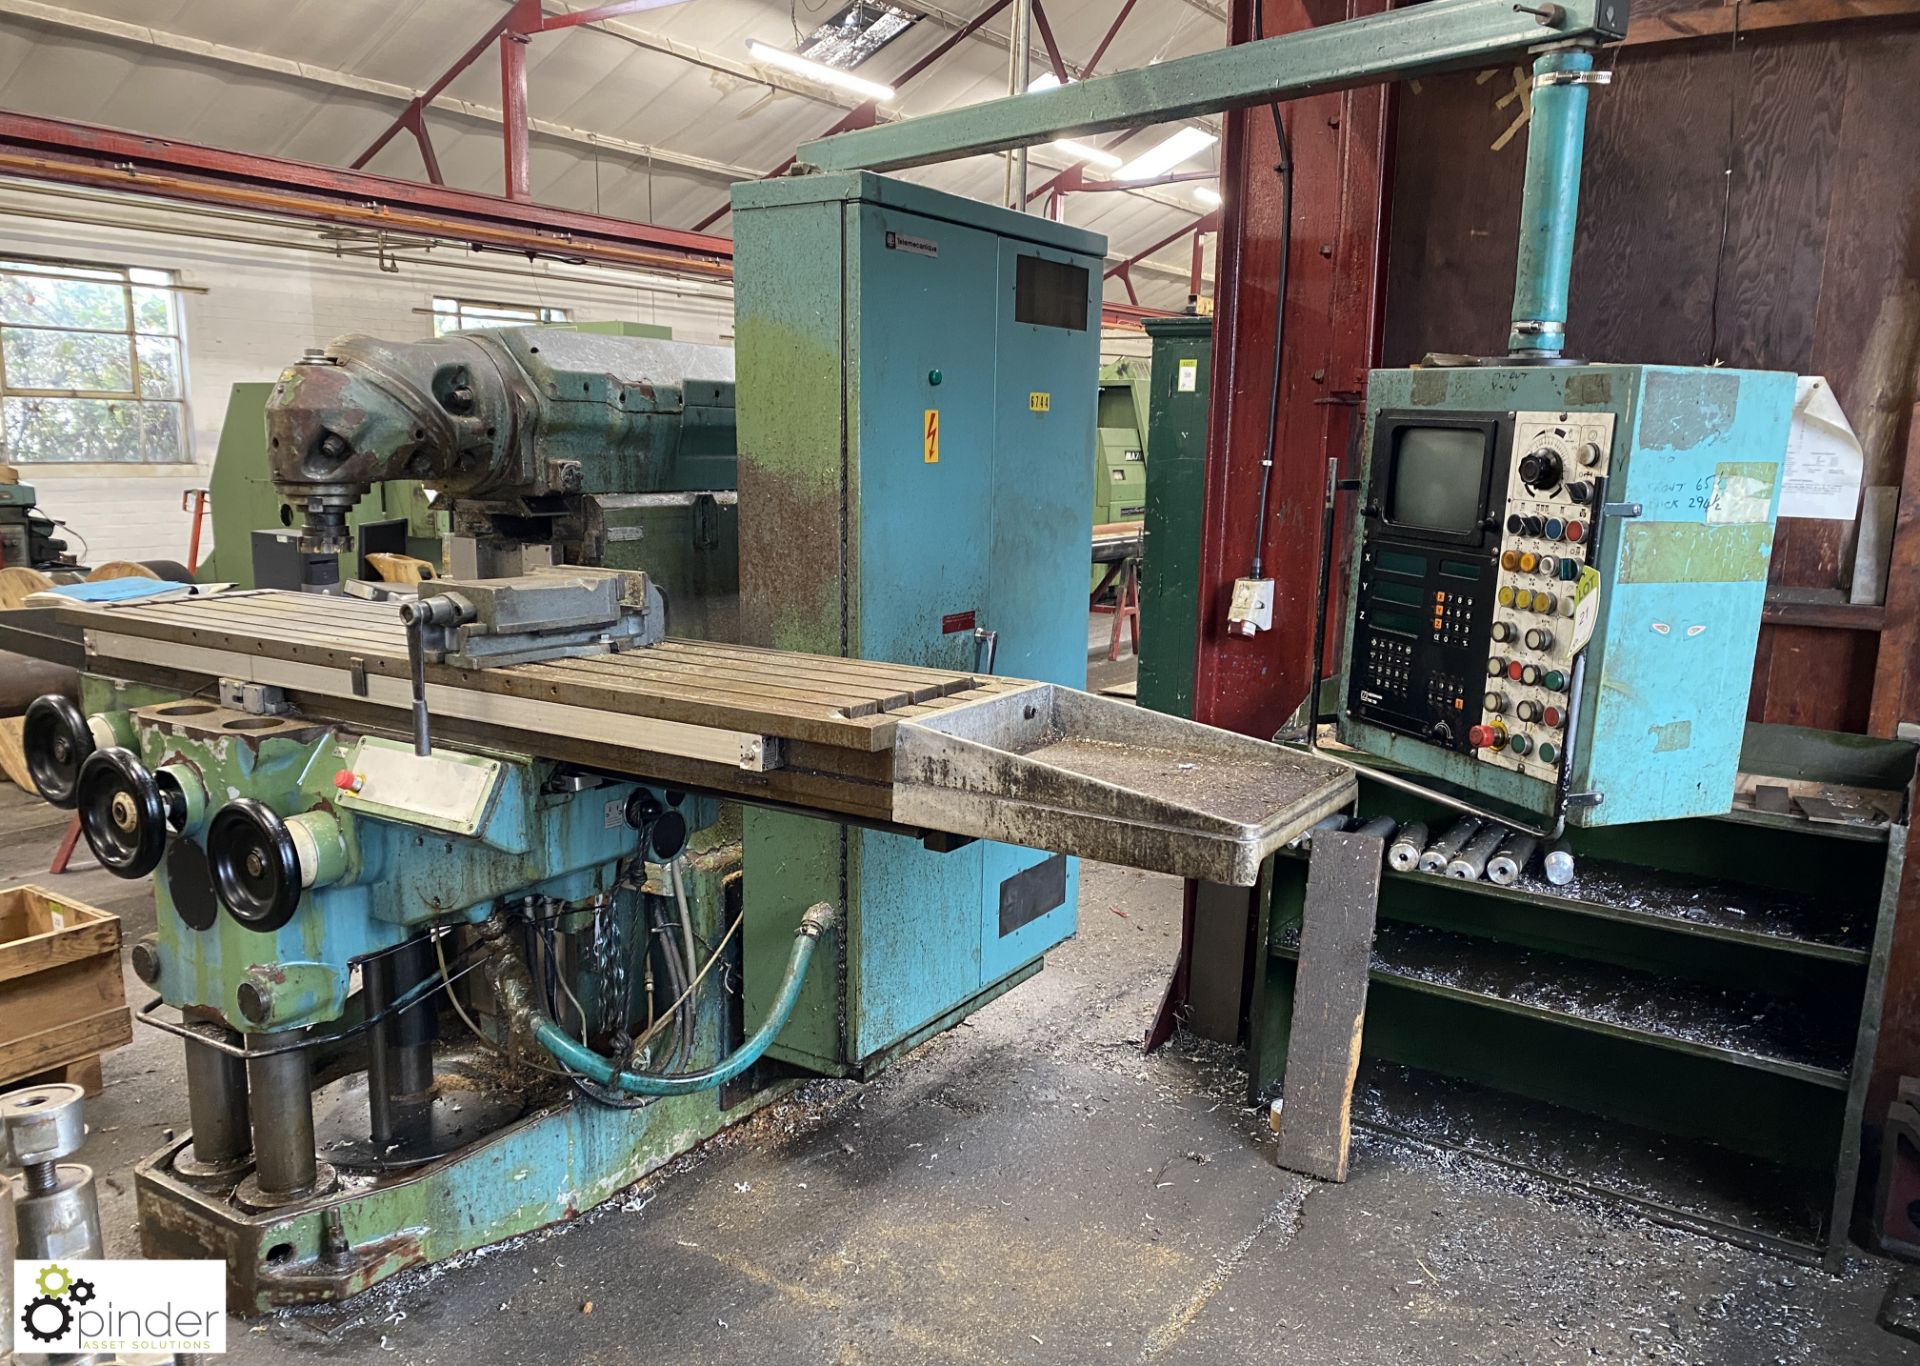 Huron M2006 knee type N/C Milling Machine, 415volts, serial number B5675, year 1983, with Heidenhain - Image 8 of 15